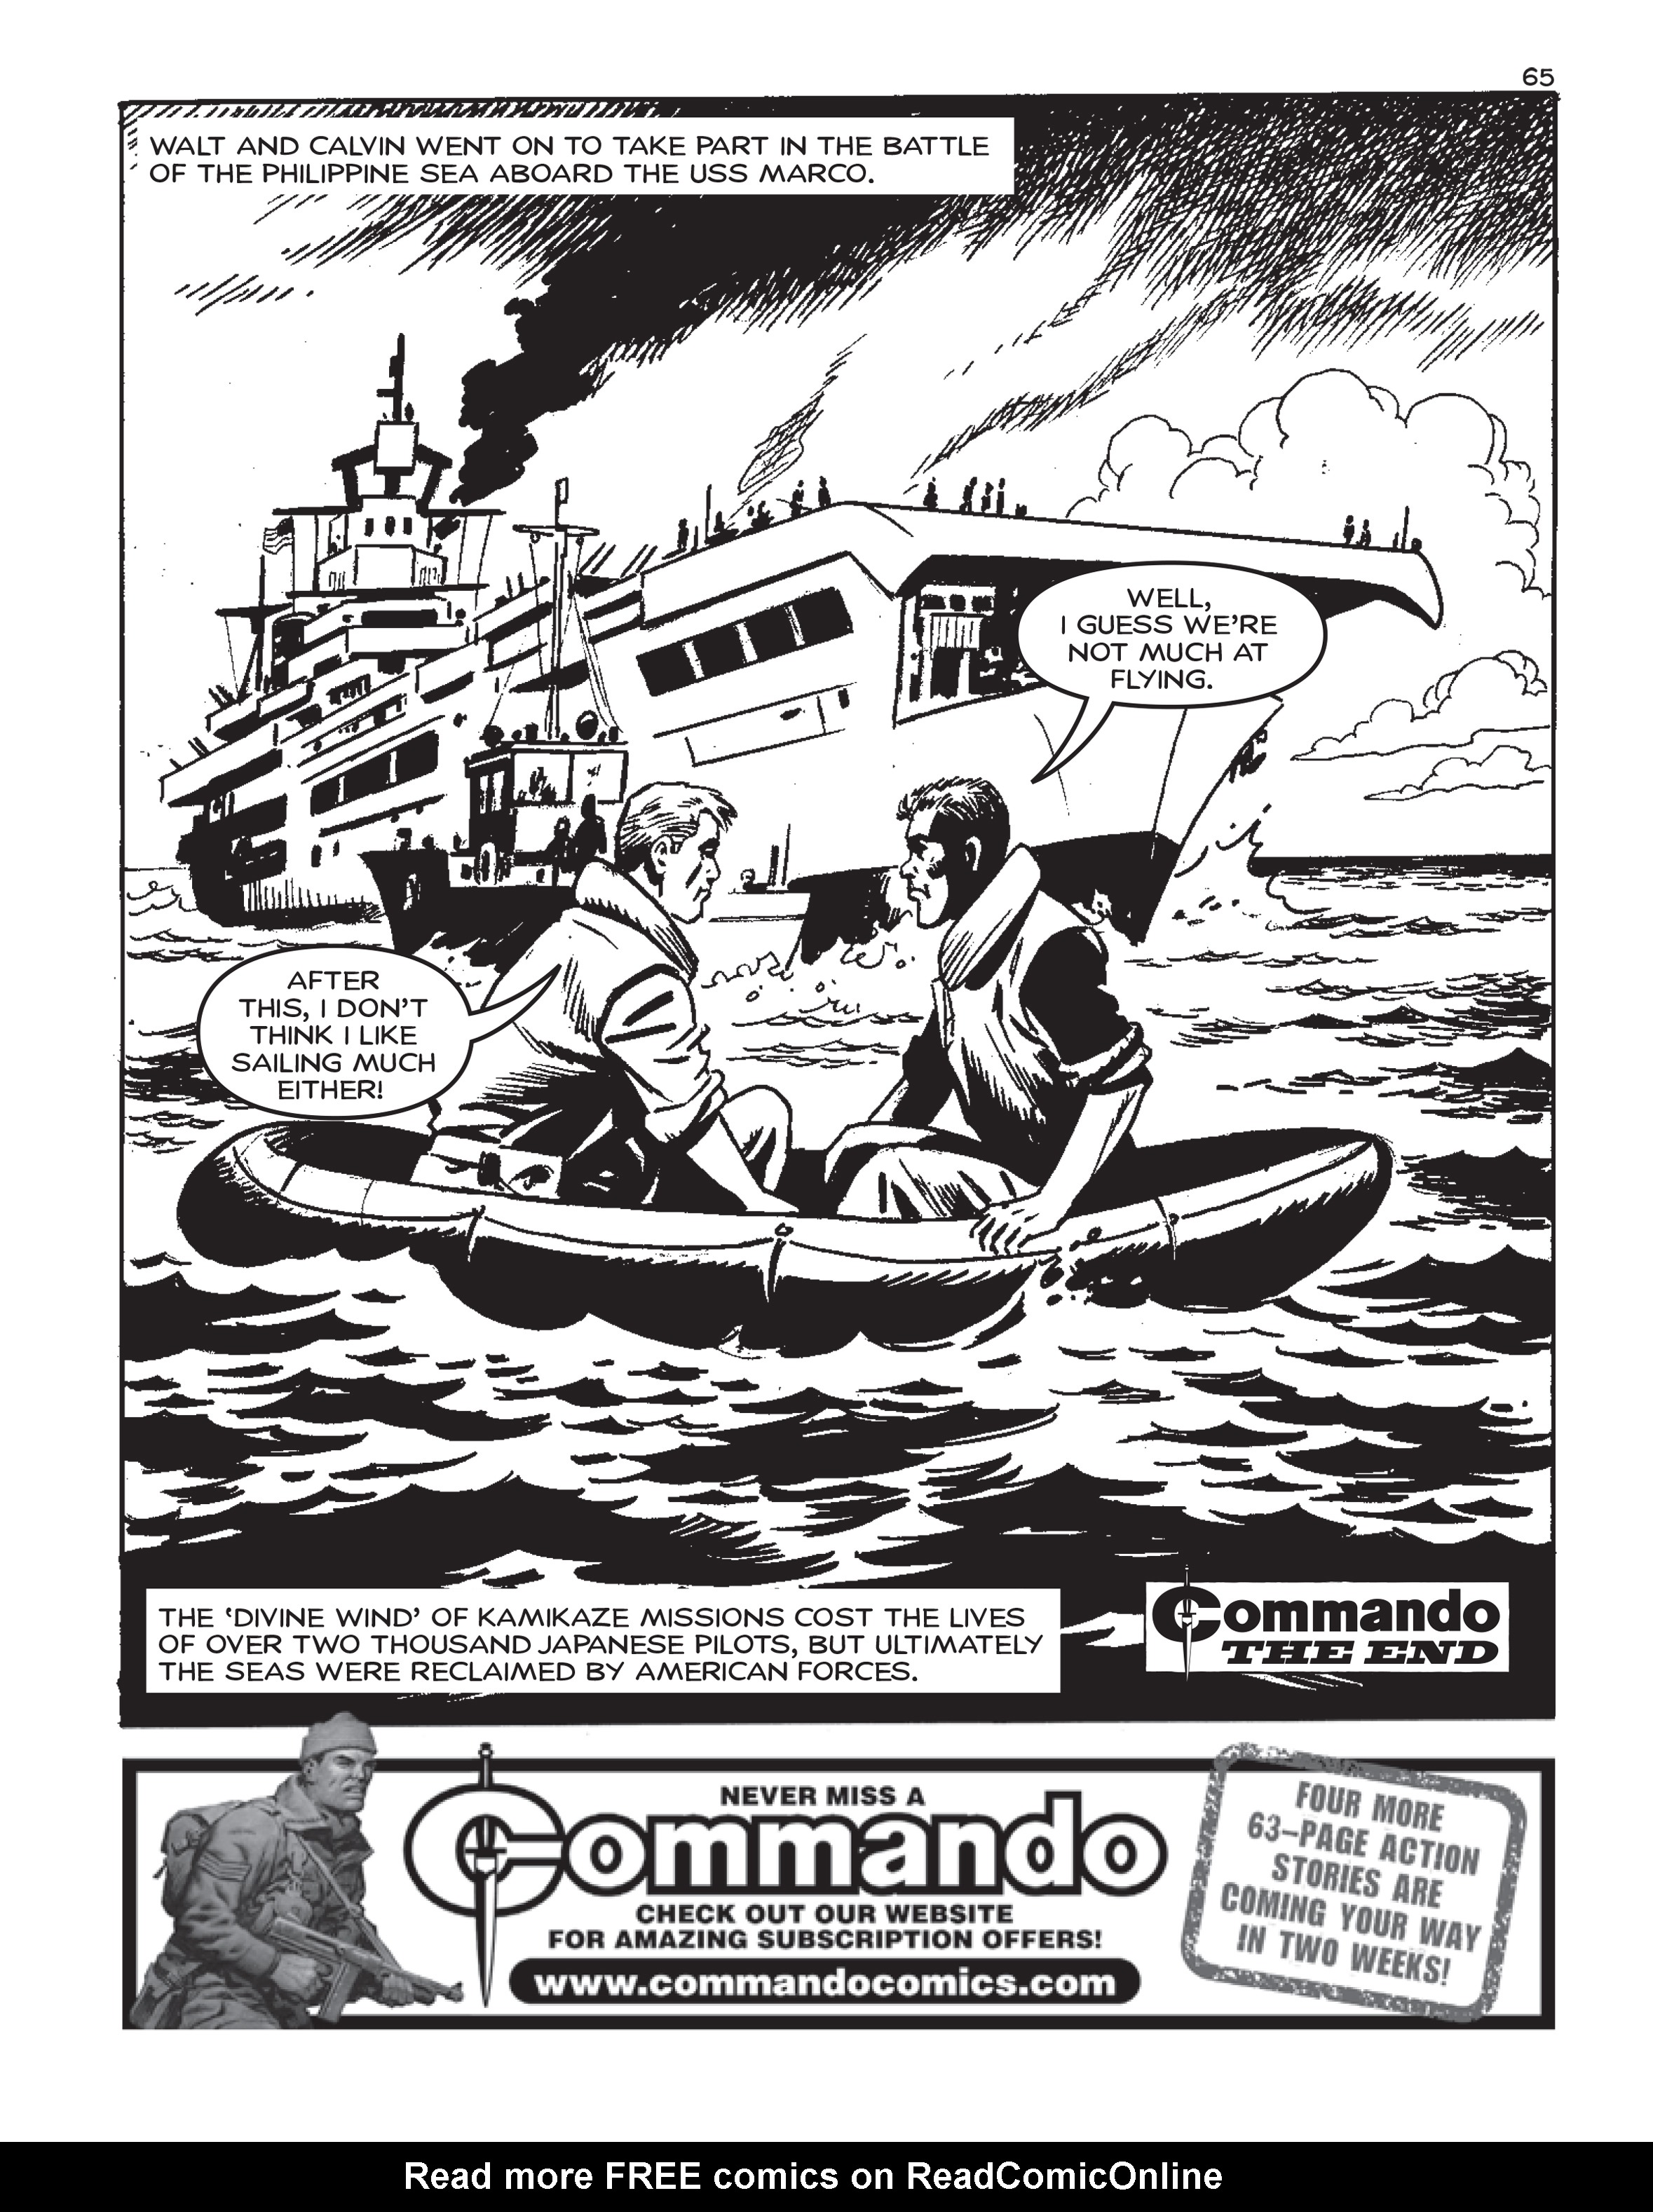 Read online Commando: For Action and Adventure comic -  Issue #5227 - 64